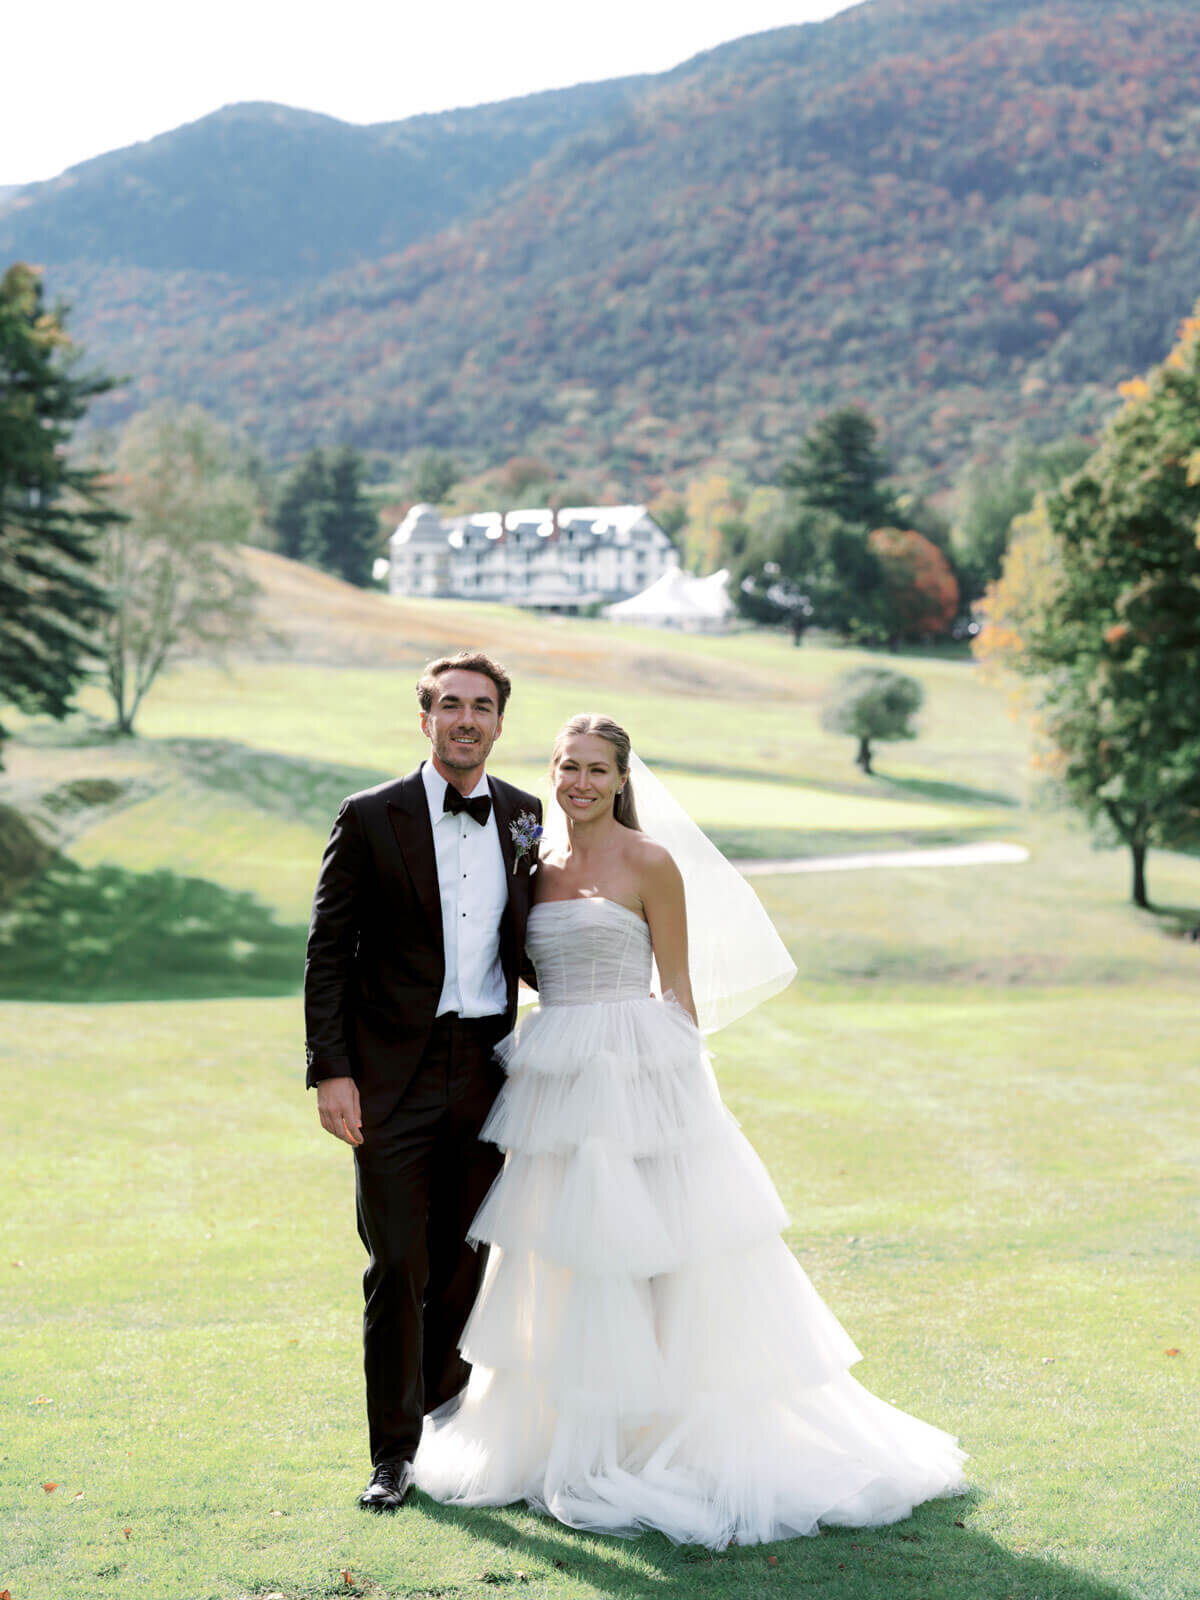 The bride and groom are standing close, smiling at the camera, at The Ausable Club's golf course, NY. Image by Jenny Fu Studio.